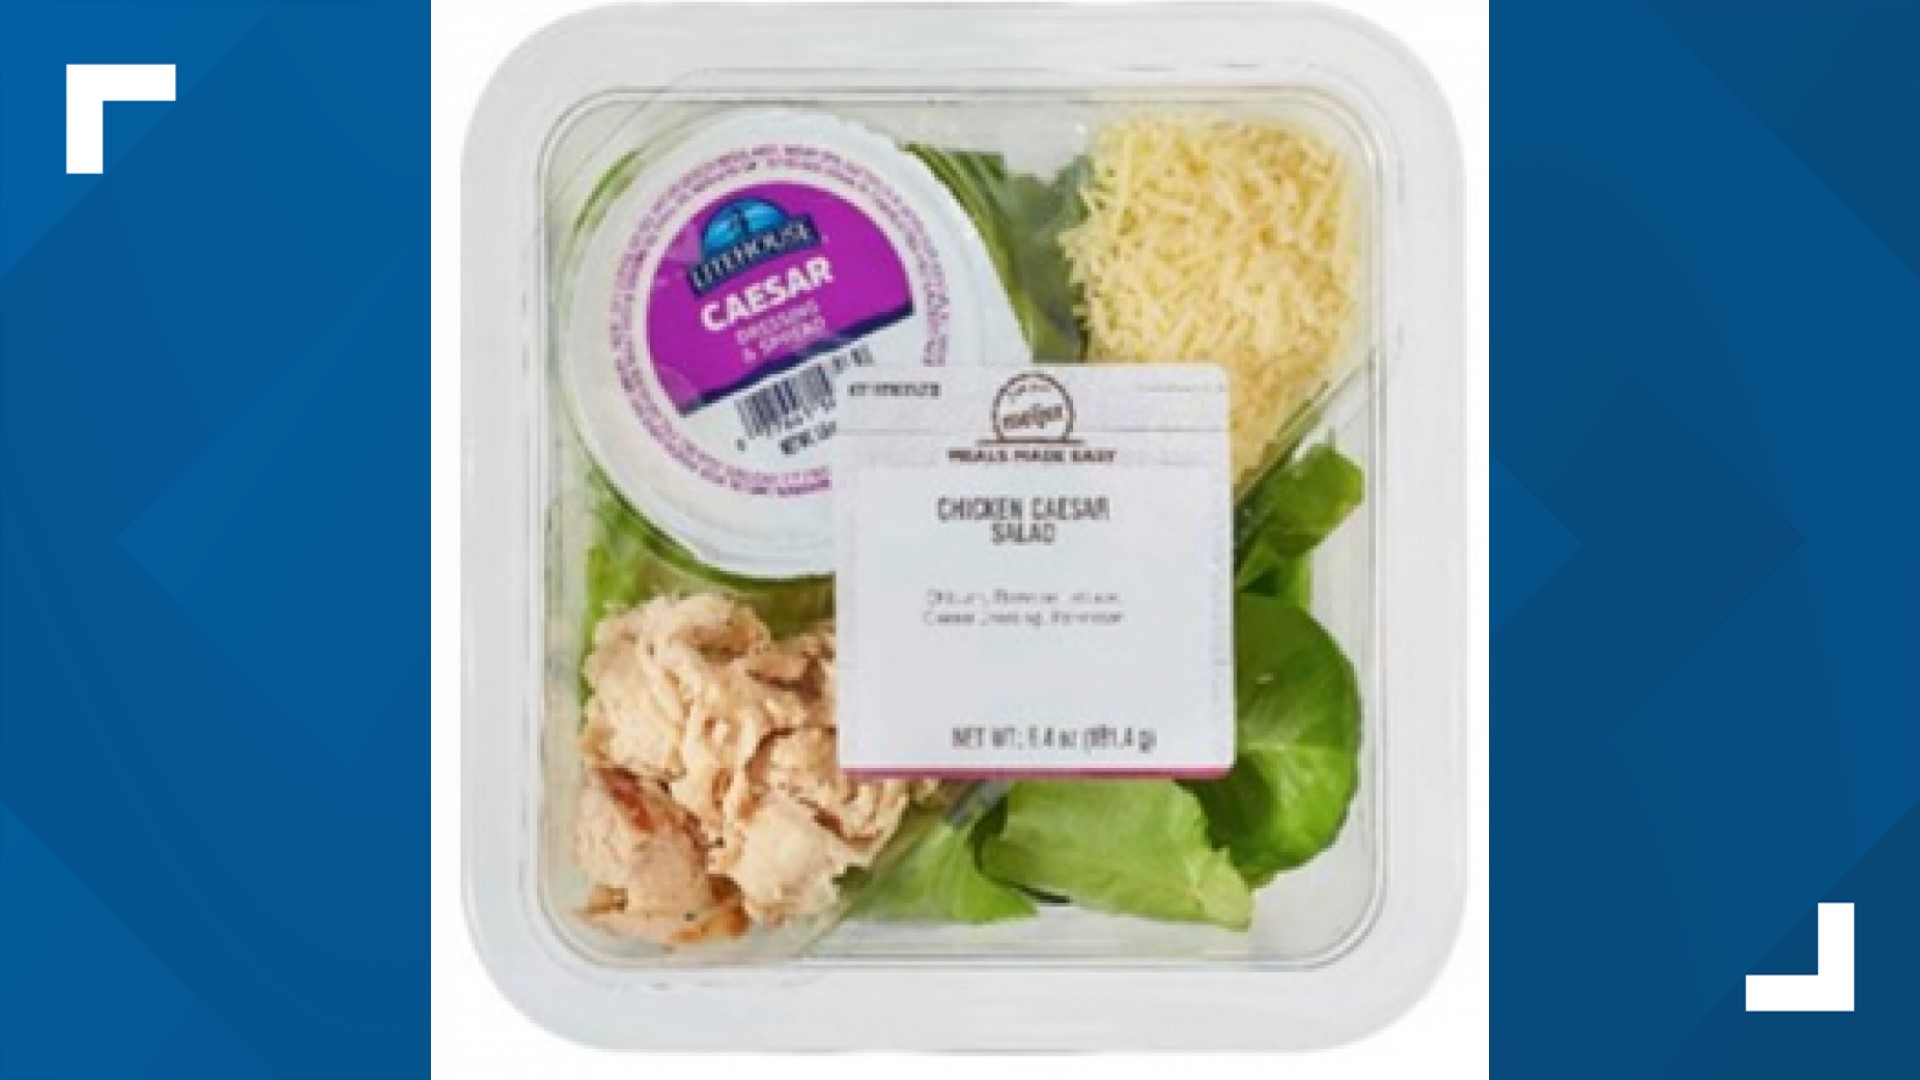 Check your fridge! Premade salads sold at Meijer stores are being recalled for listeria concerns.